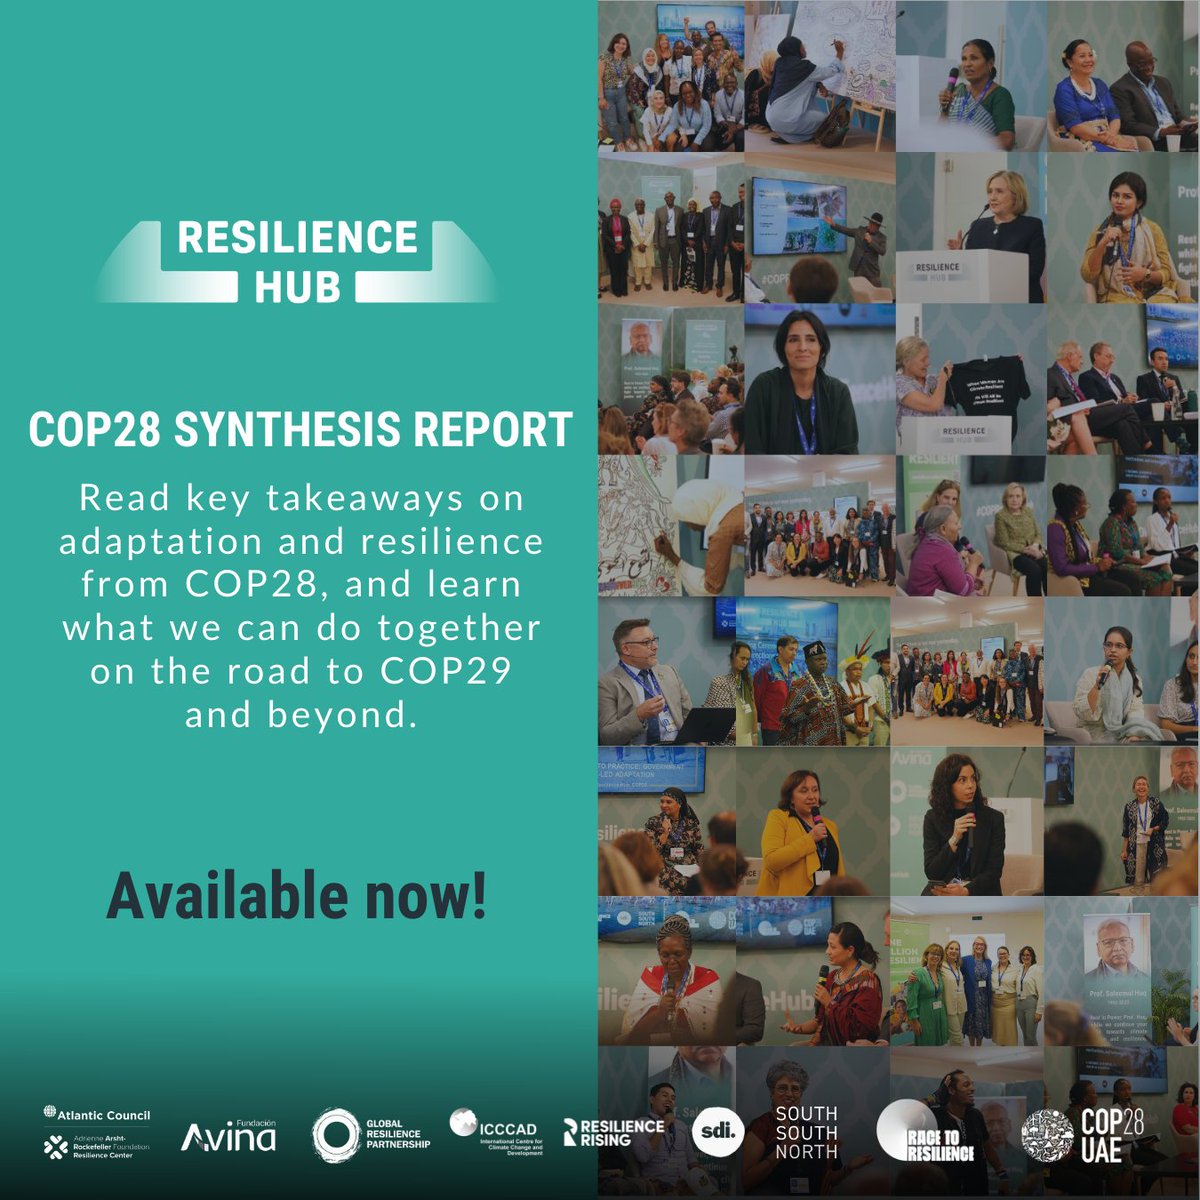 The new COP28 @copreshub Synthesis Report is out! See key takeaways & policy insights from 📗 70 sessions across 9 themes 🌍 14,000+ global participants 🤝70+ organisations Download the full report here: 📌cop-resilience-hub.org/cop28-synthesi…